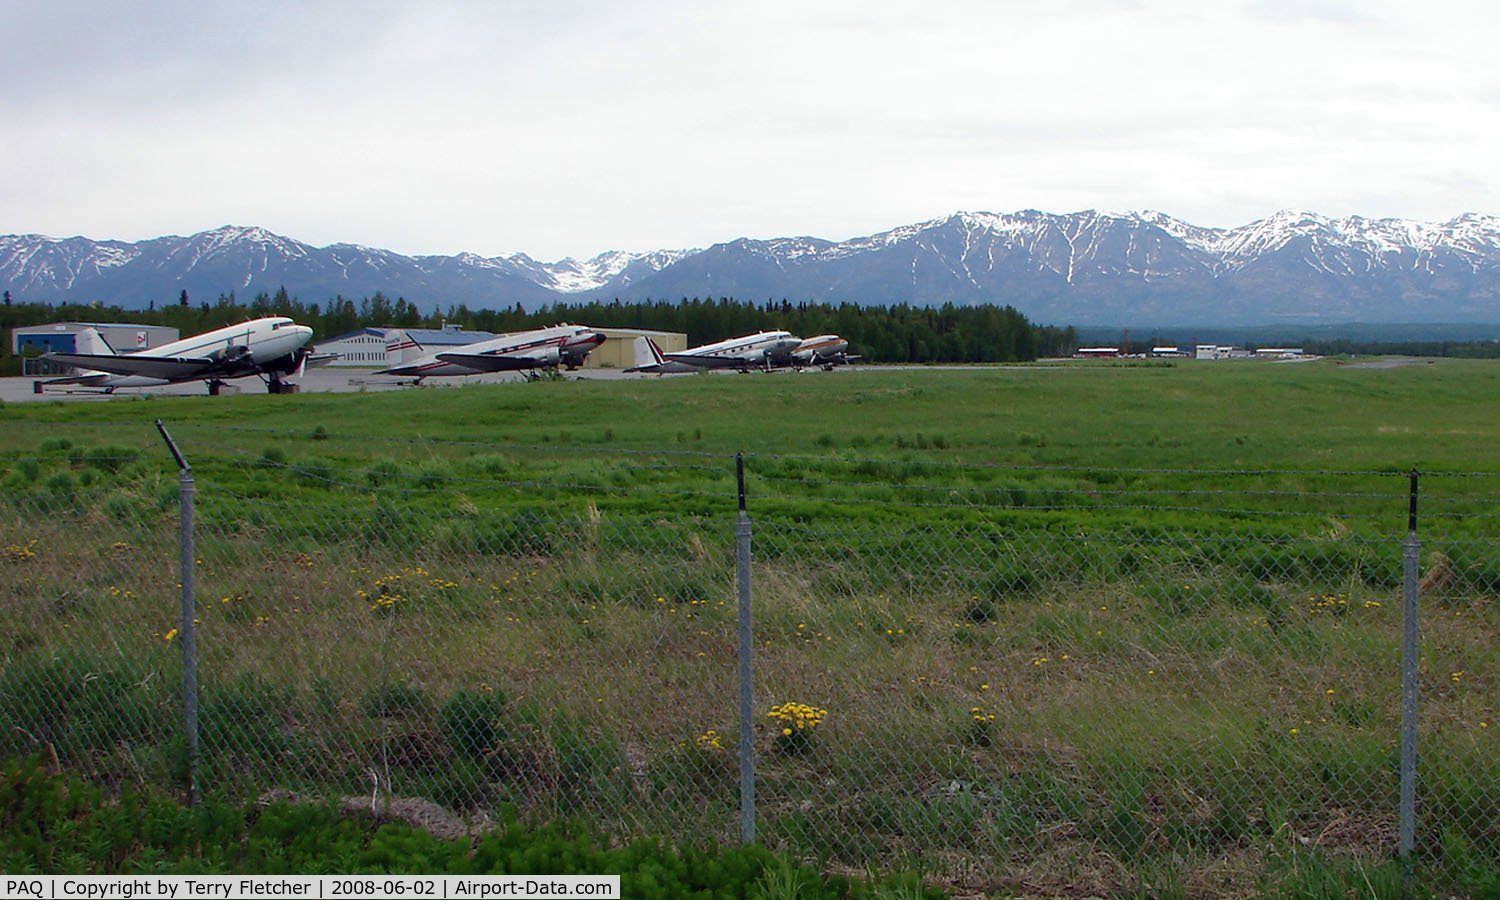 Palmer Municipal Airport (PAQ) - A general view of Palmer Municipal , Alaska with stored DC3s and C-119 Boxcars